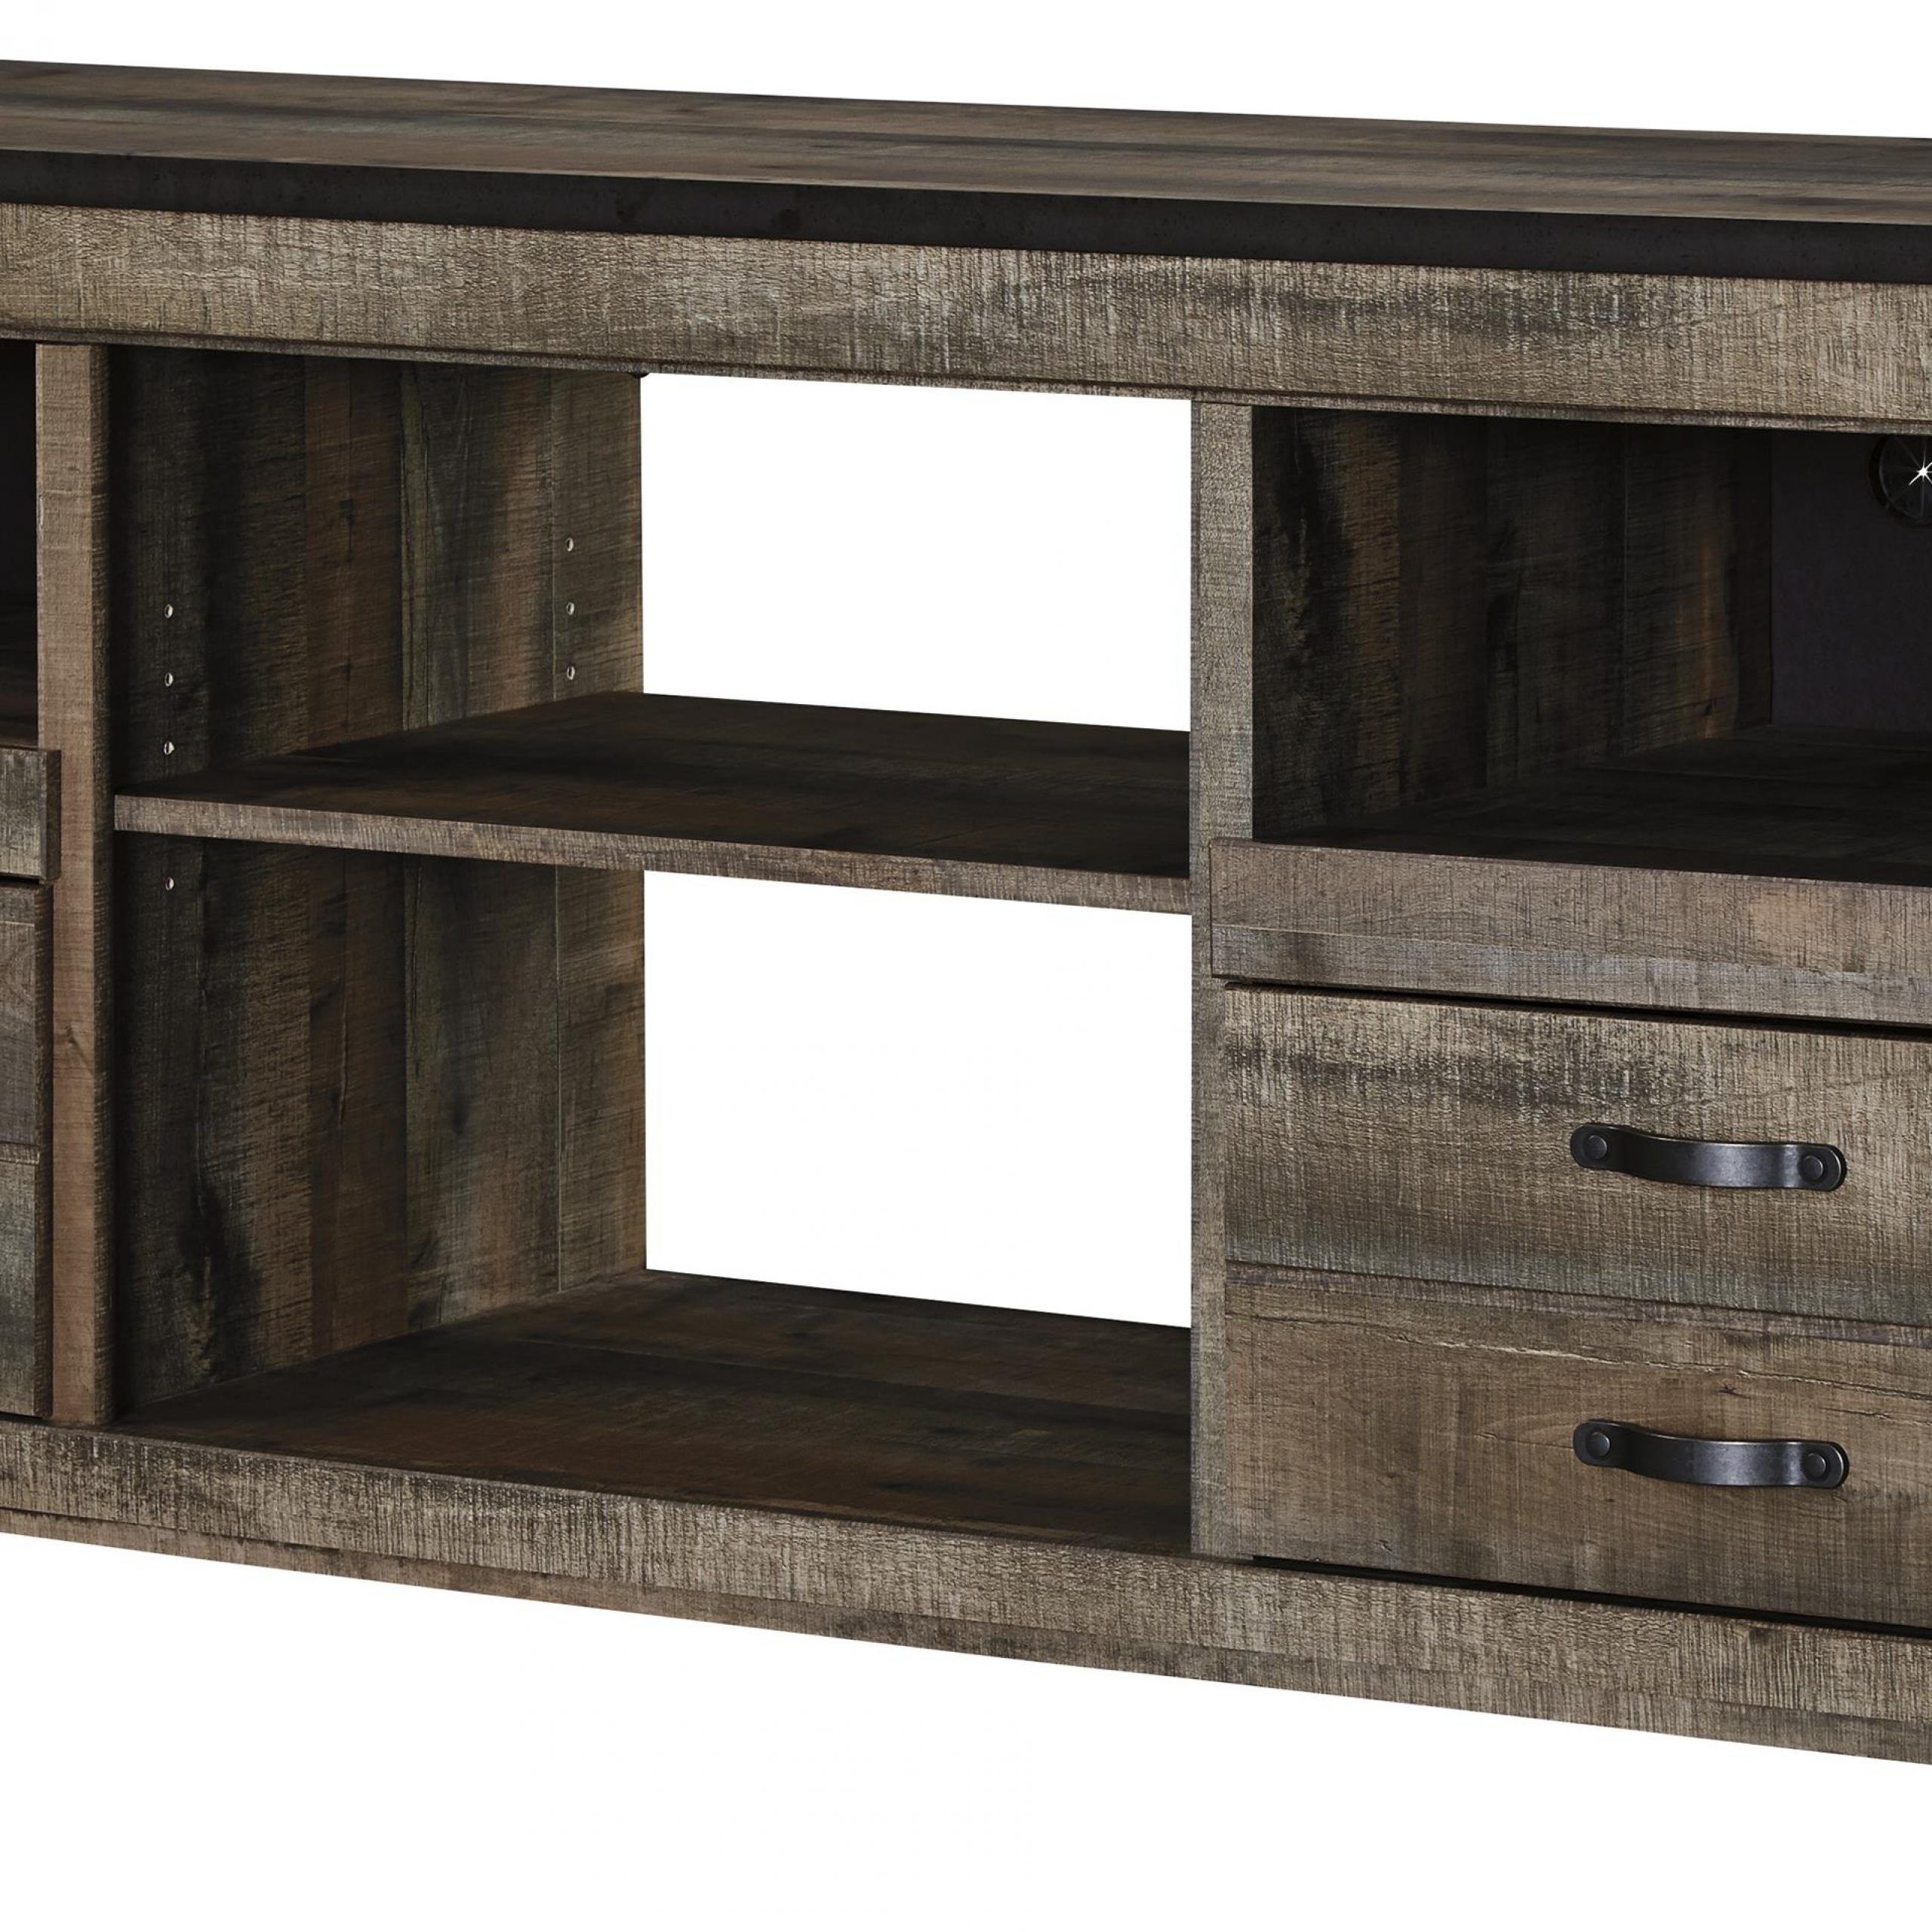 Vendor 3 Trinell 0170085 Rustic Large Tv Stand With Metal Intended For Chromium Extra Wide Tv Unit Stands (Gallery 9 of 20)